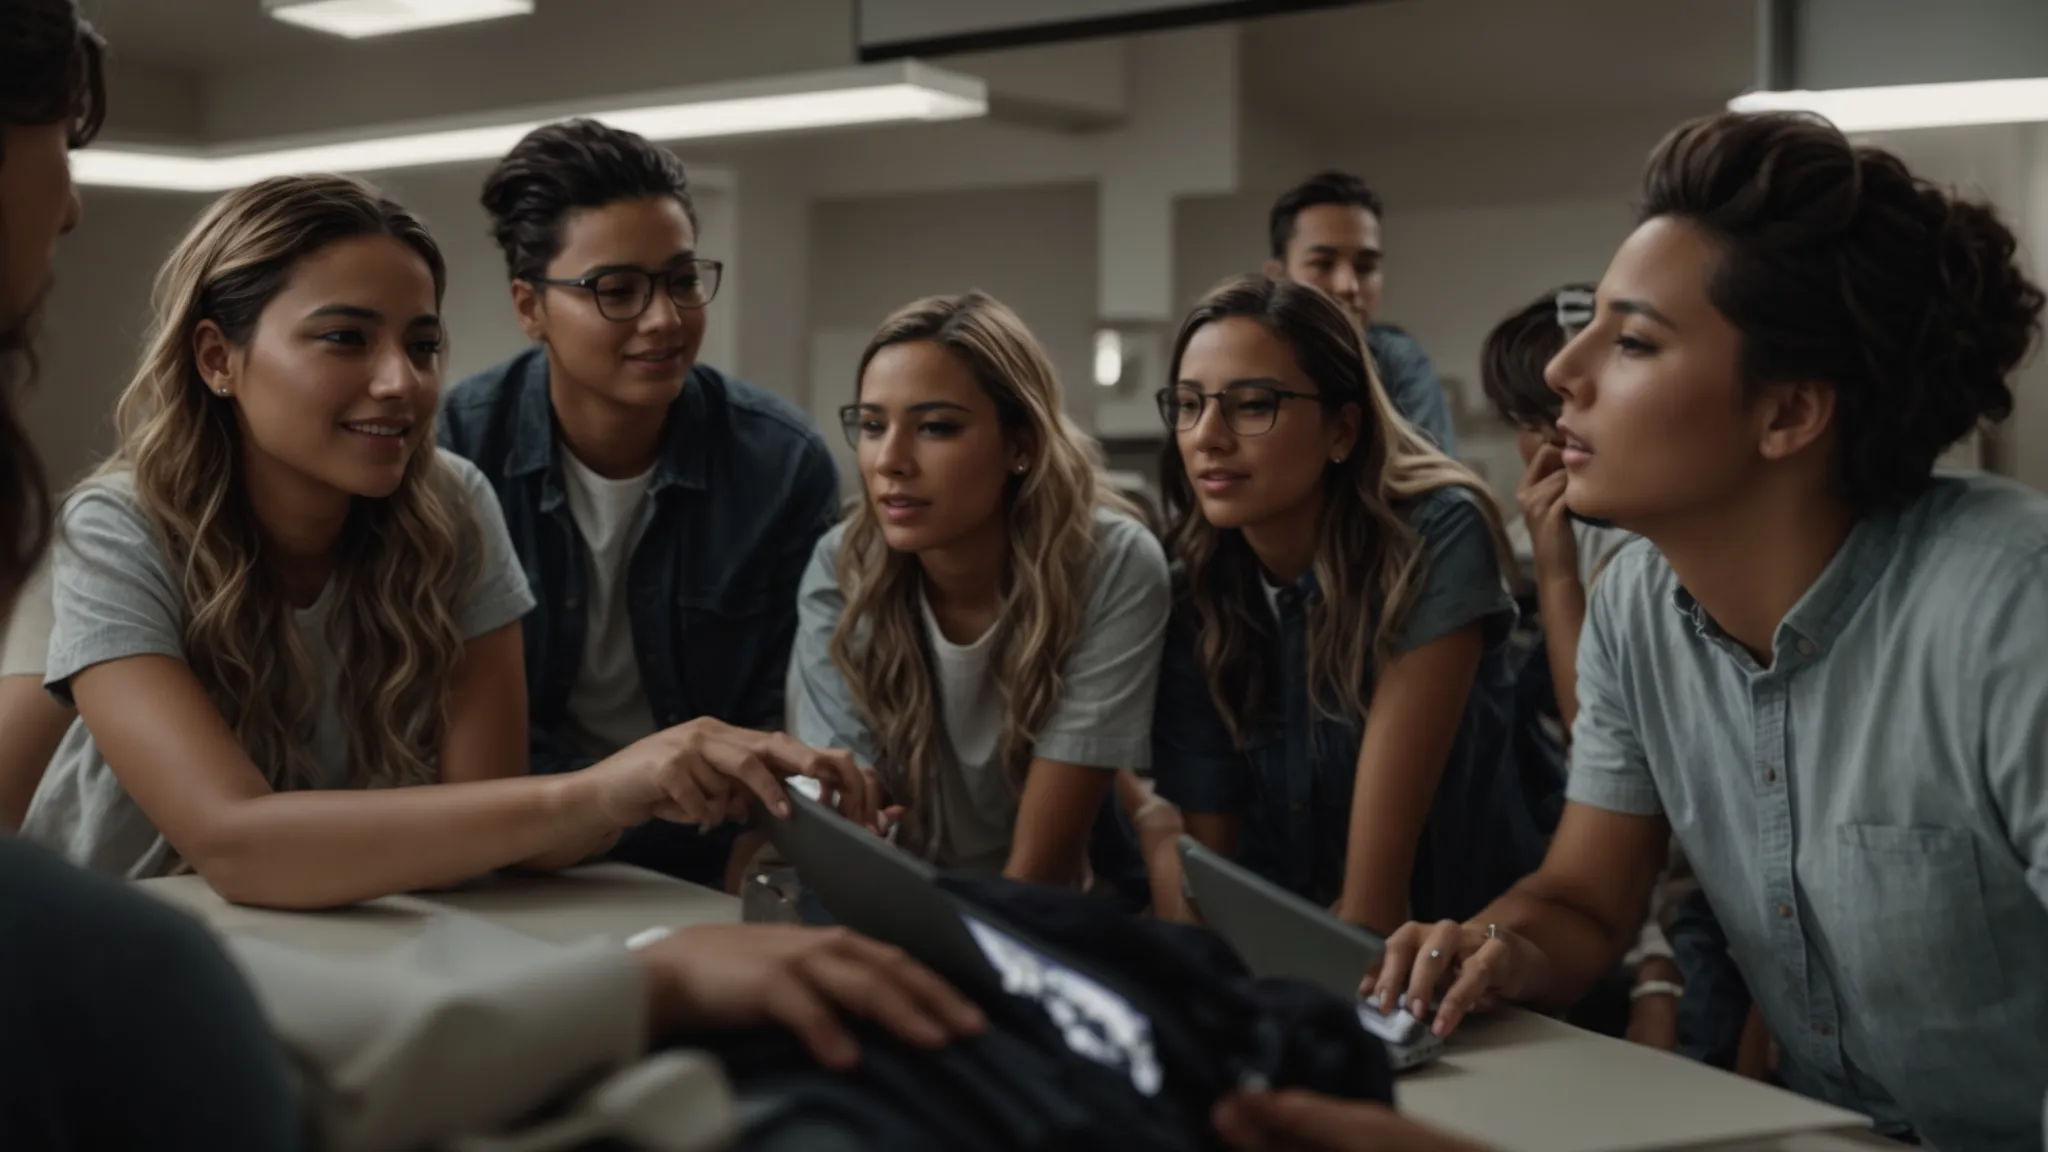 a team of people gather around a computer screen, clearly engaged in excited discussion over their latest video project.